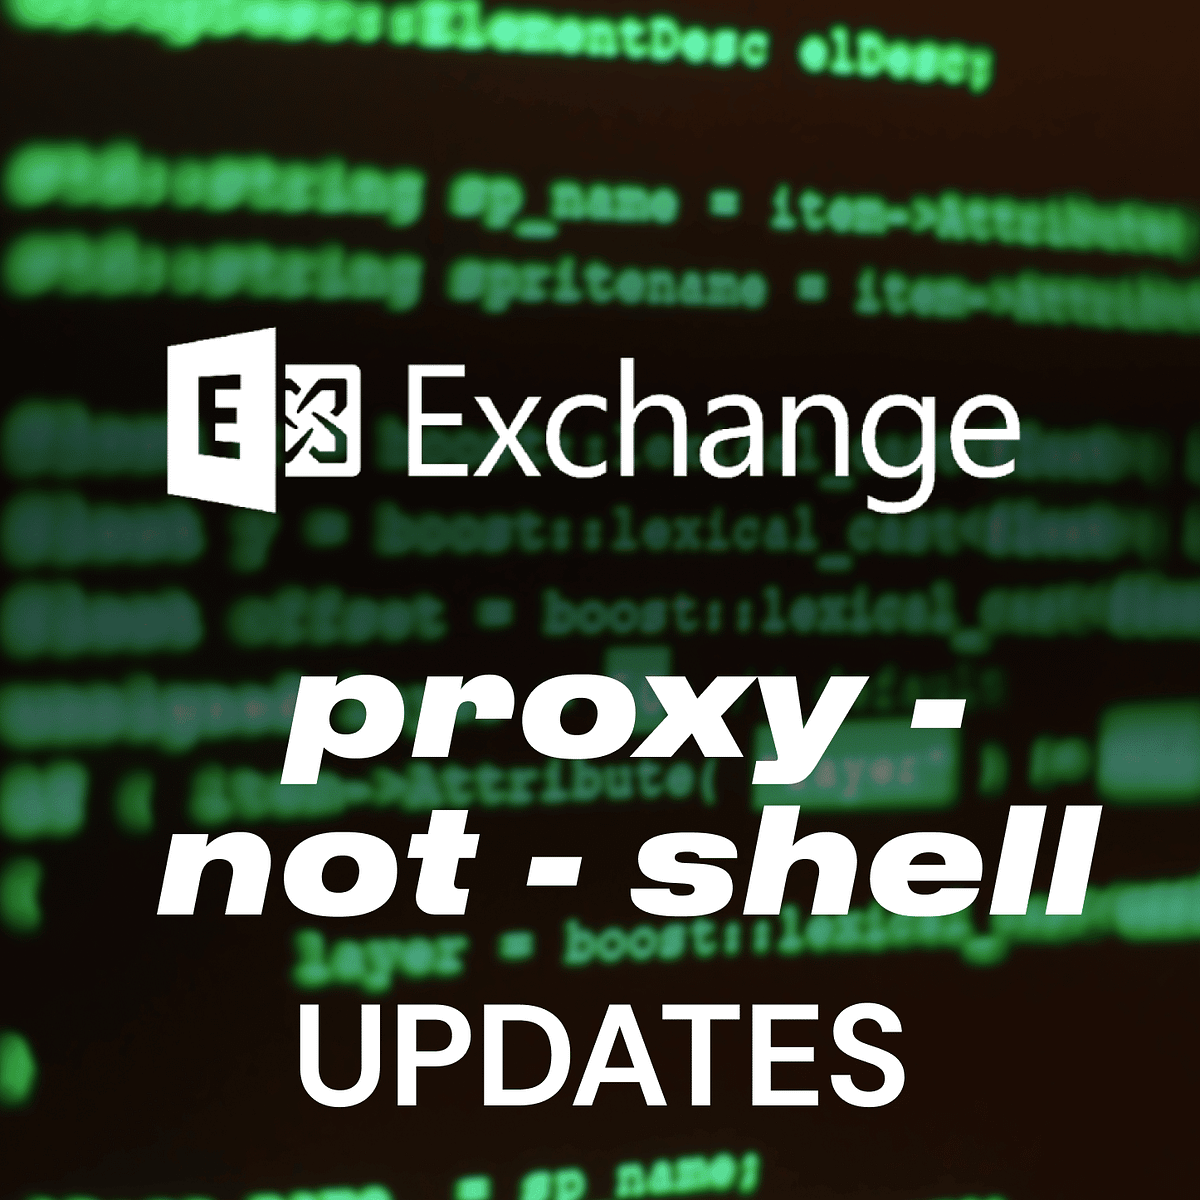 IT Support - Exchange proxy.